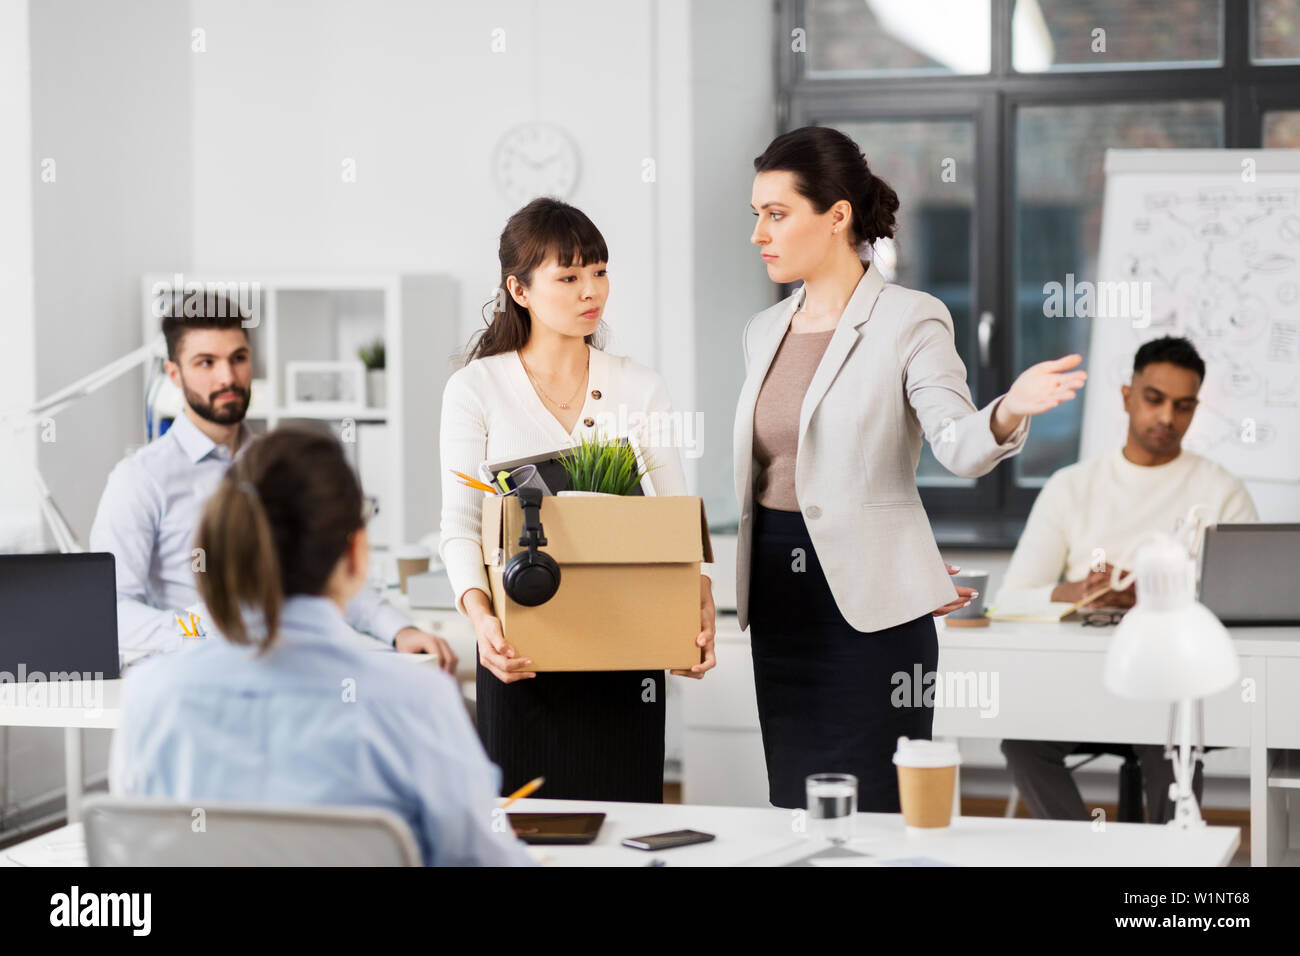 fired sad female office worker leaving Stock Photo